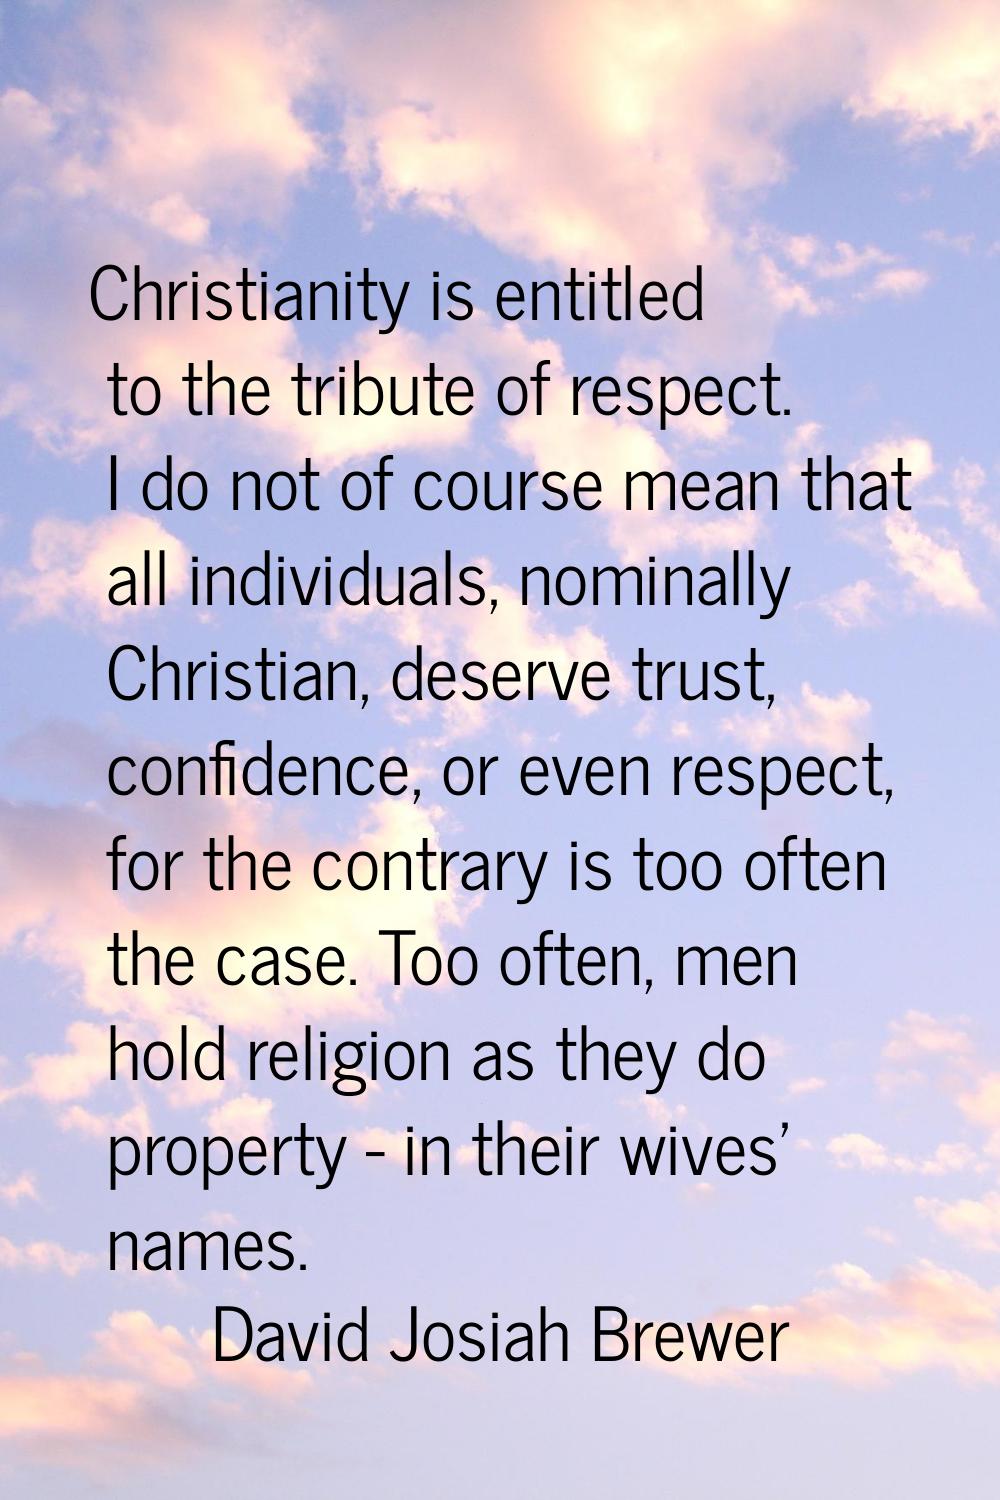 Christianity is entitled to the tribute of respect. I do not of course mean that all individuals, n